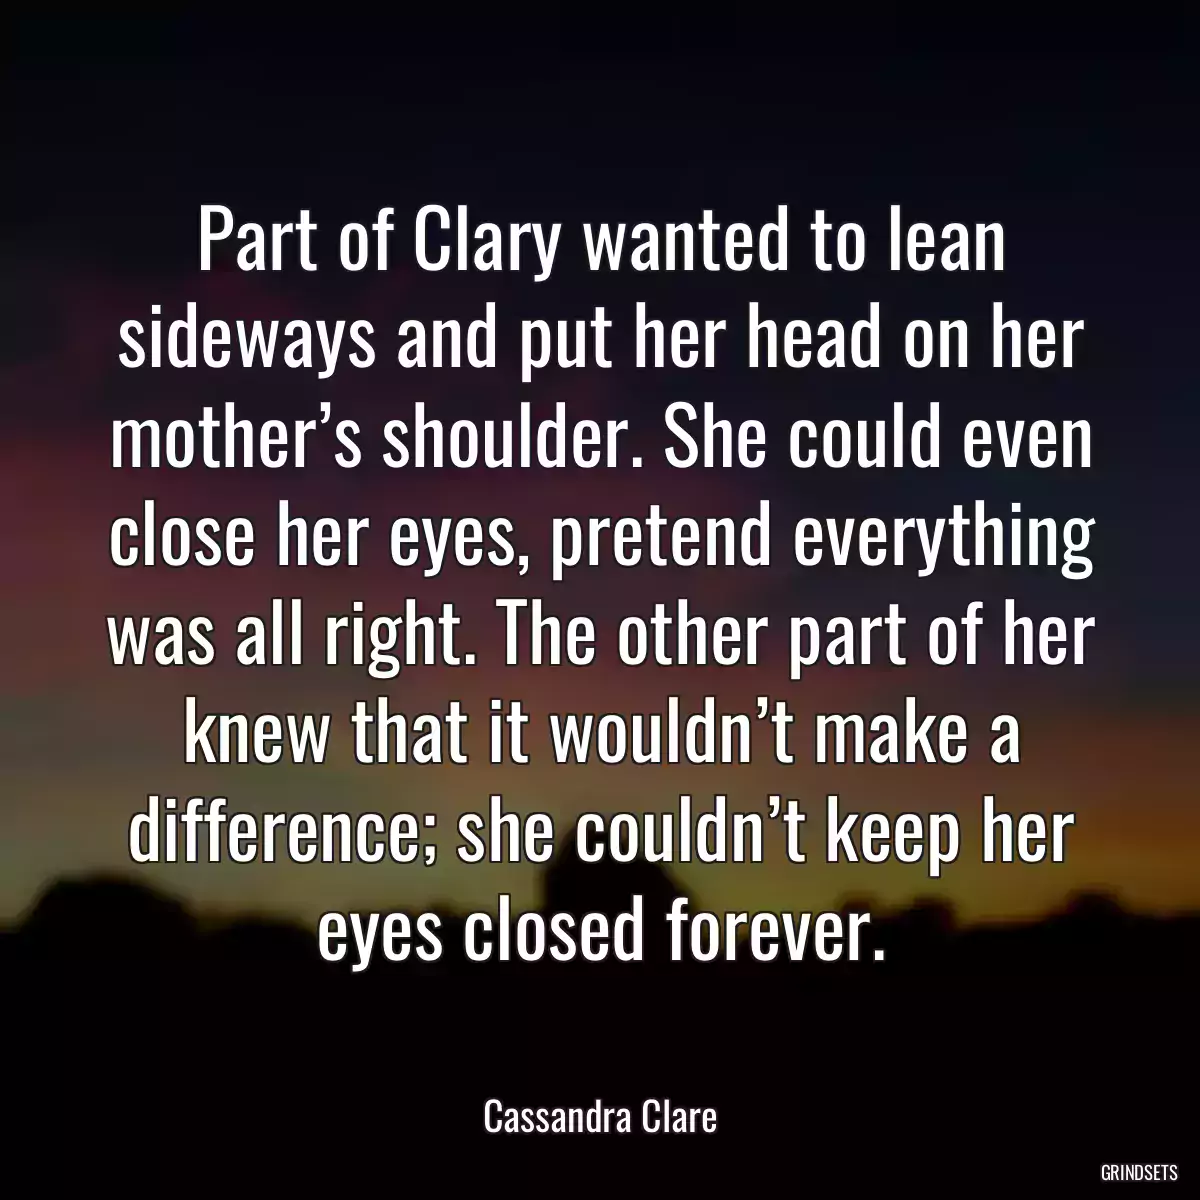 Part of Clary wanted to lean sideways and put her head on her mother’s shoulder. She could even close her eyes, pretend everything was all right. The other part of her knew that it wouldn’t make a difference; she couldn’t keep her eyes closed forever.